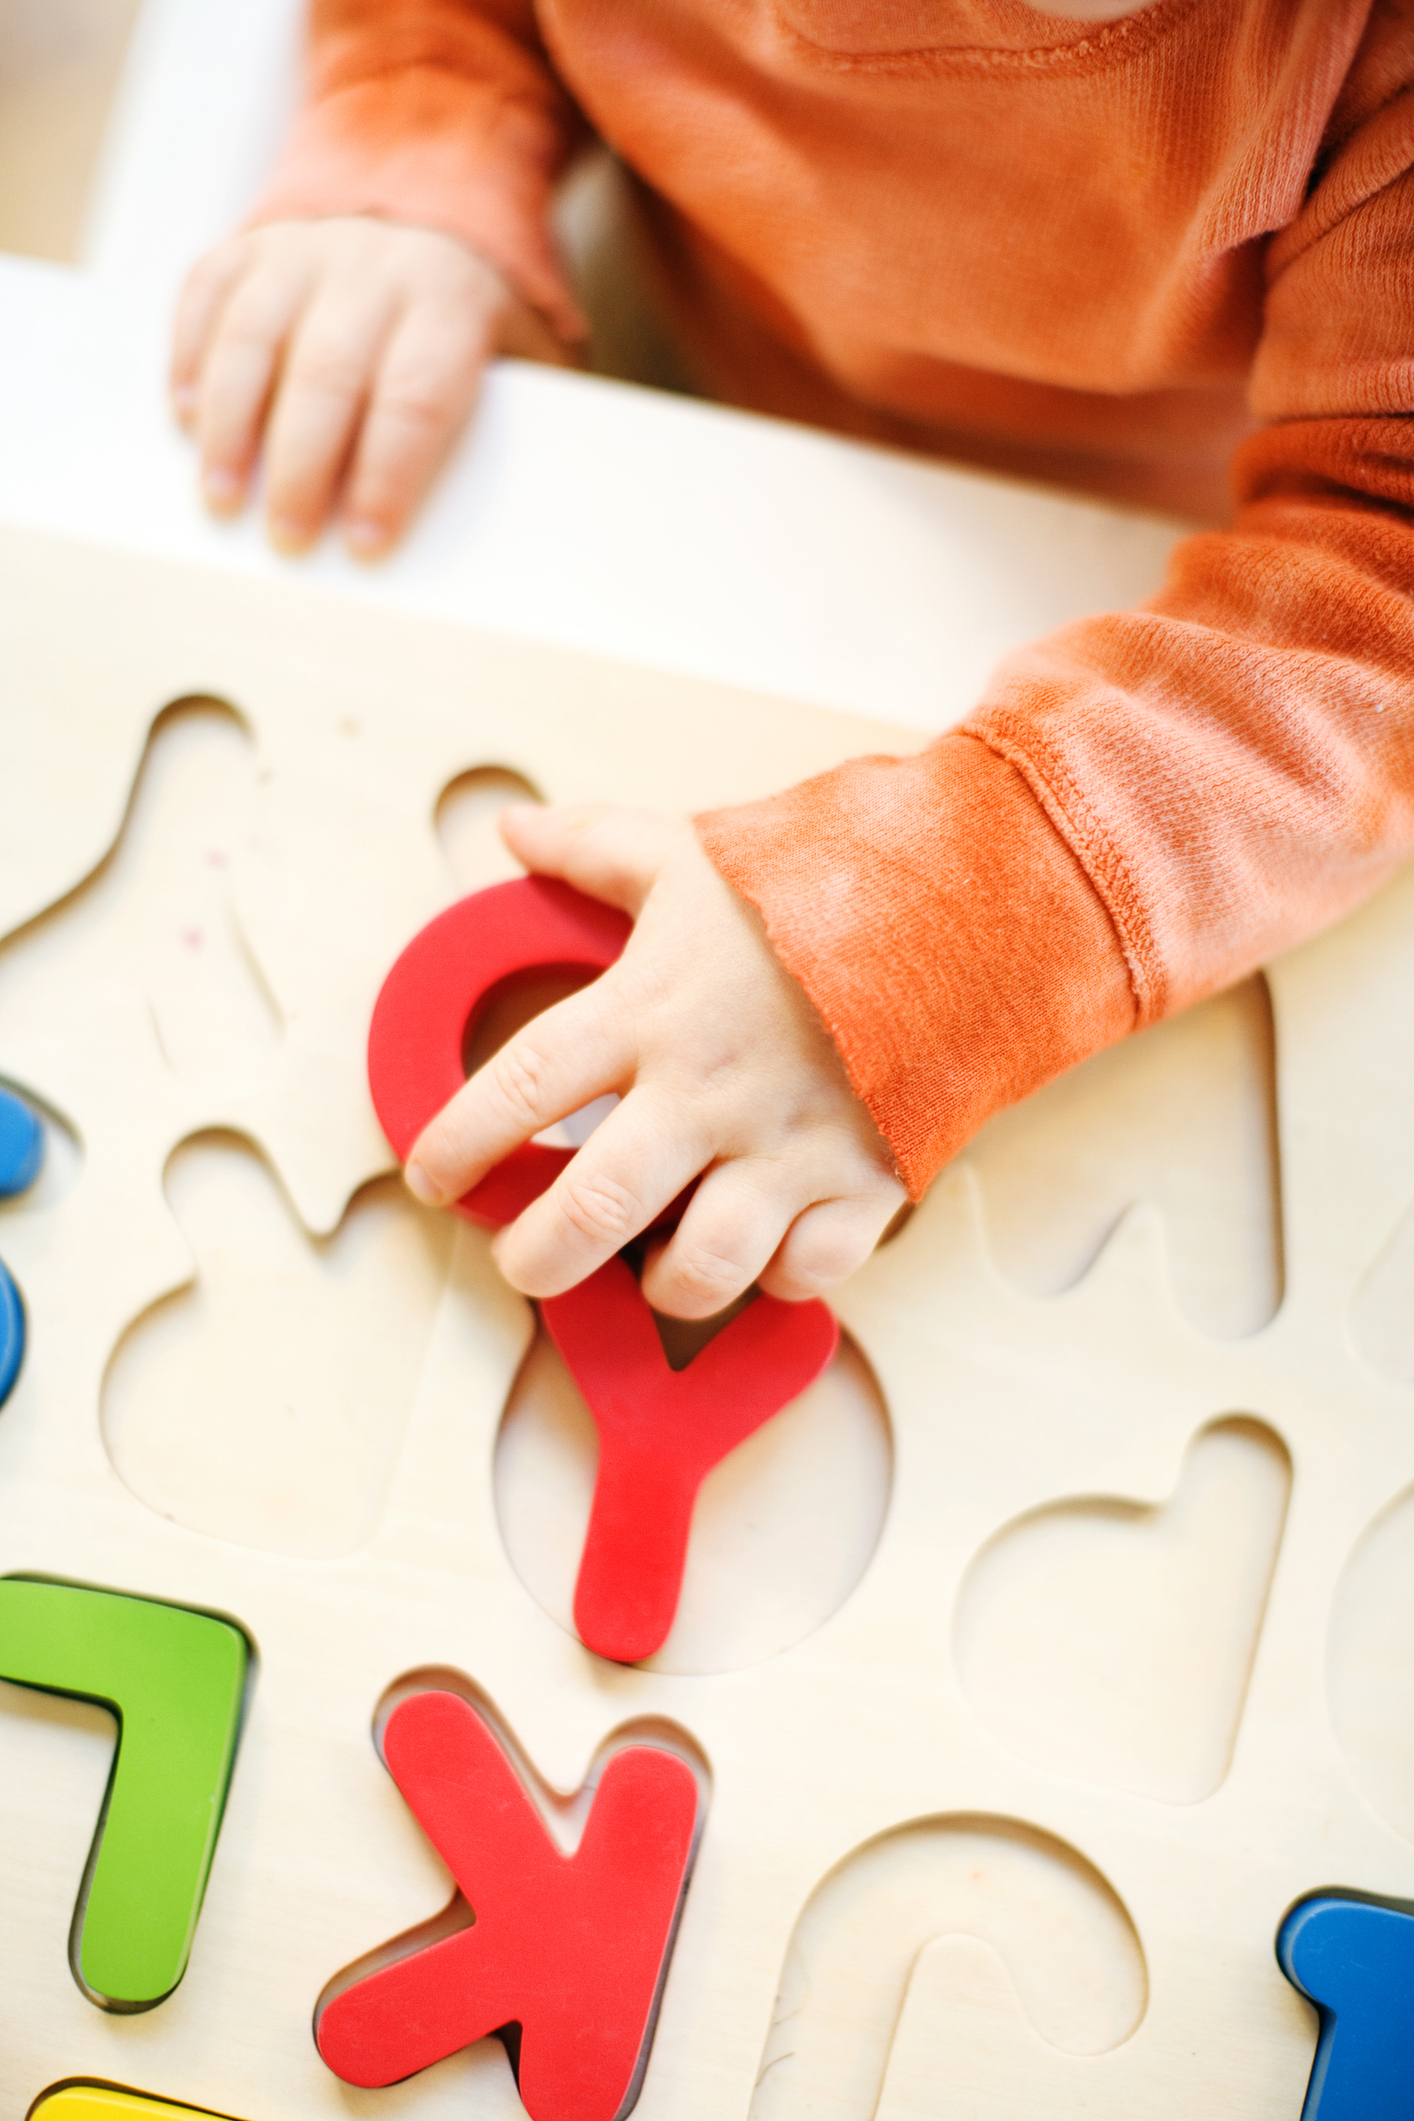 Child&#x27;s hand solving a wooden puzzle, placing a red piece